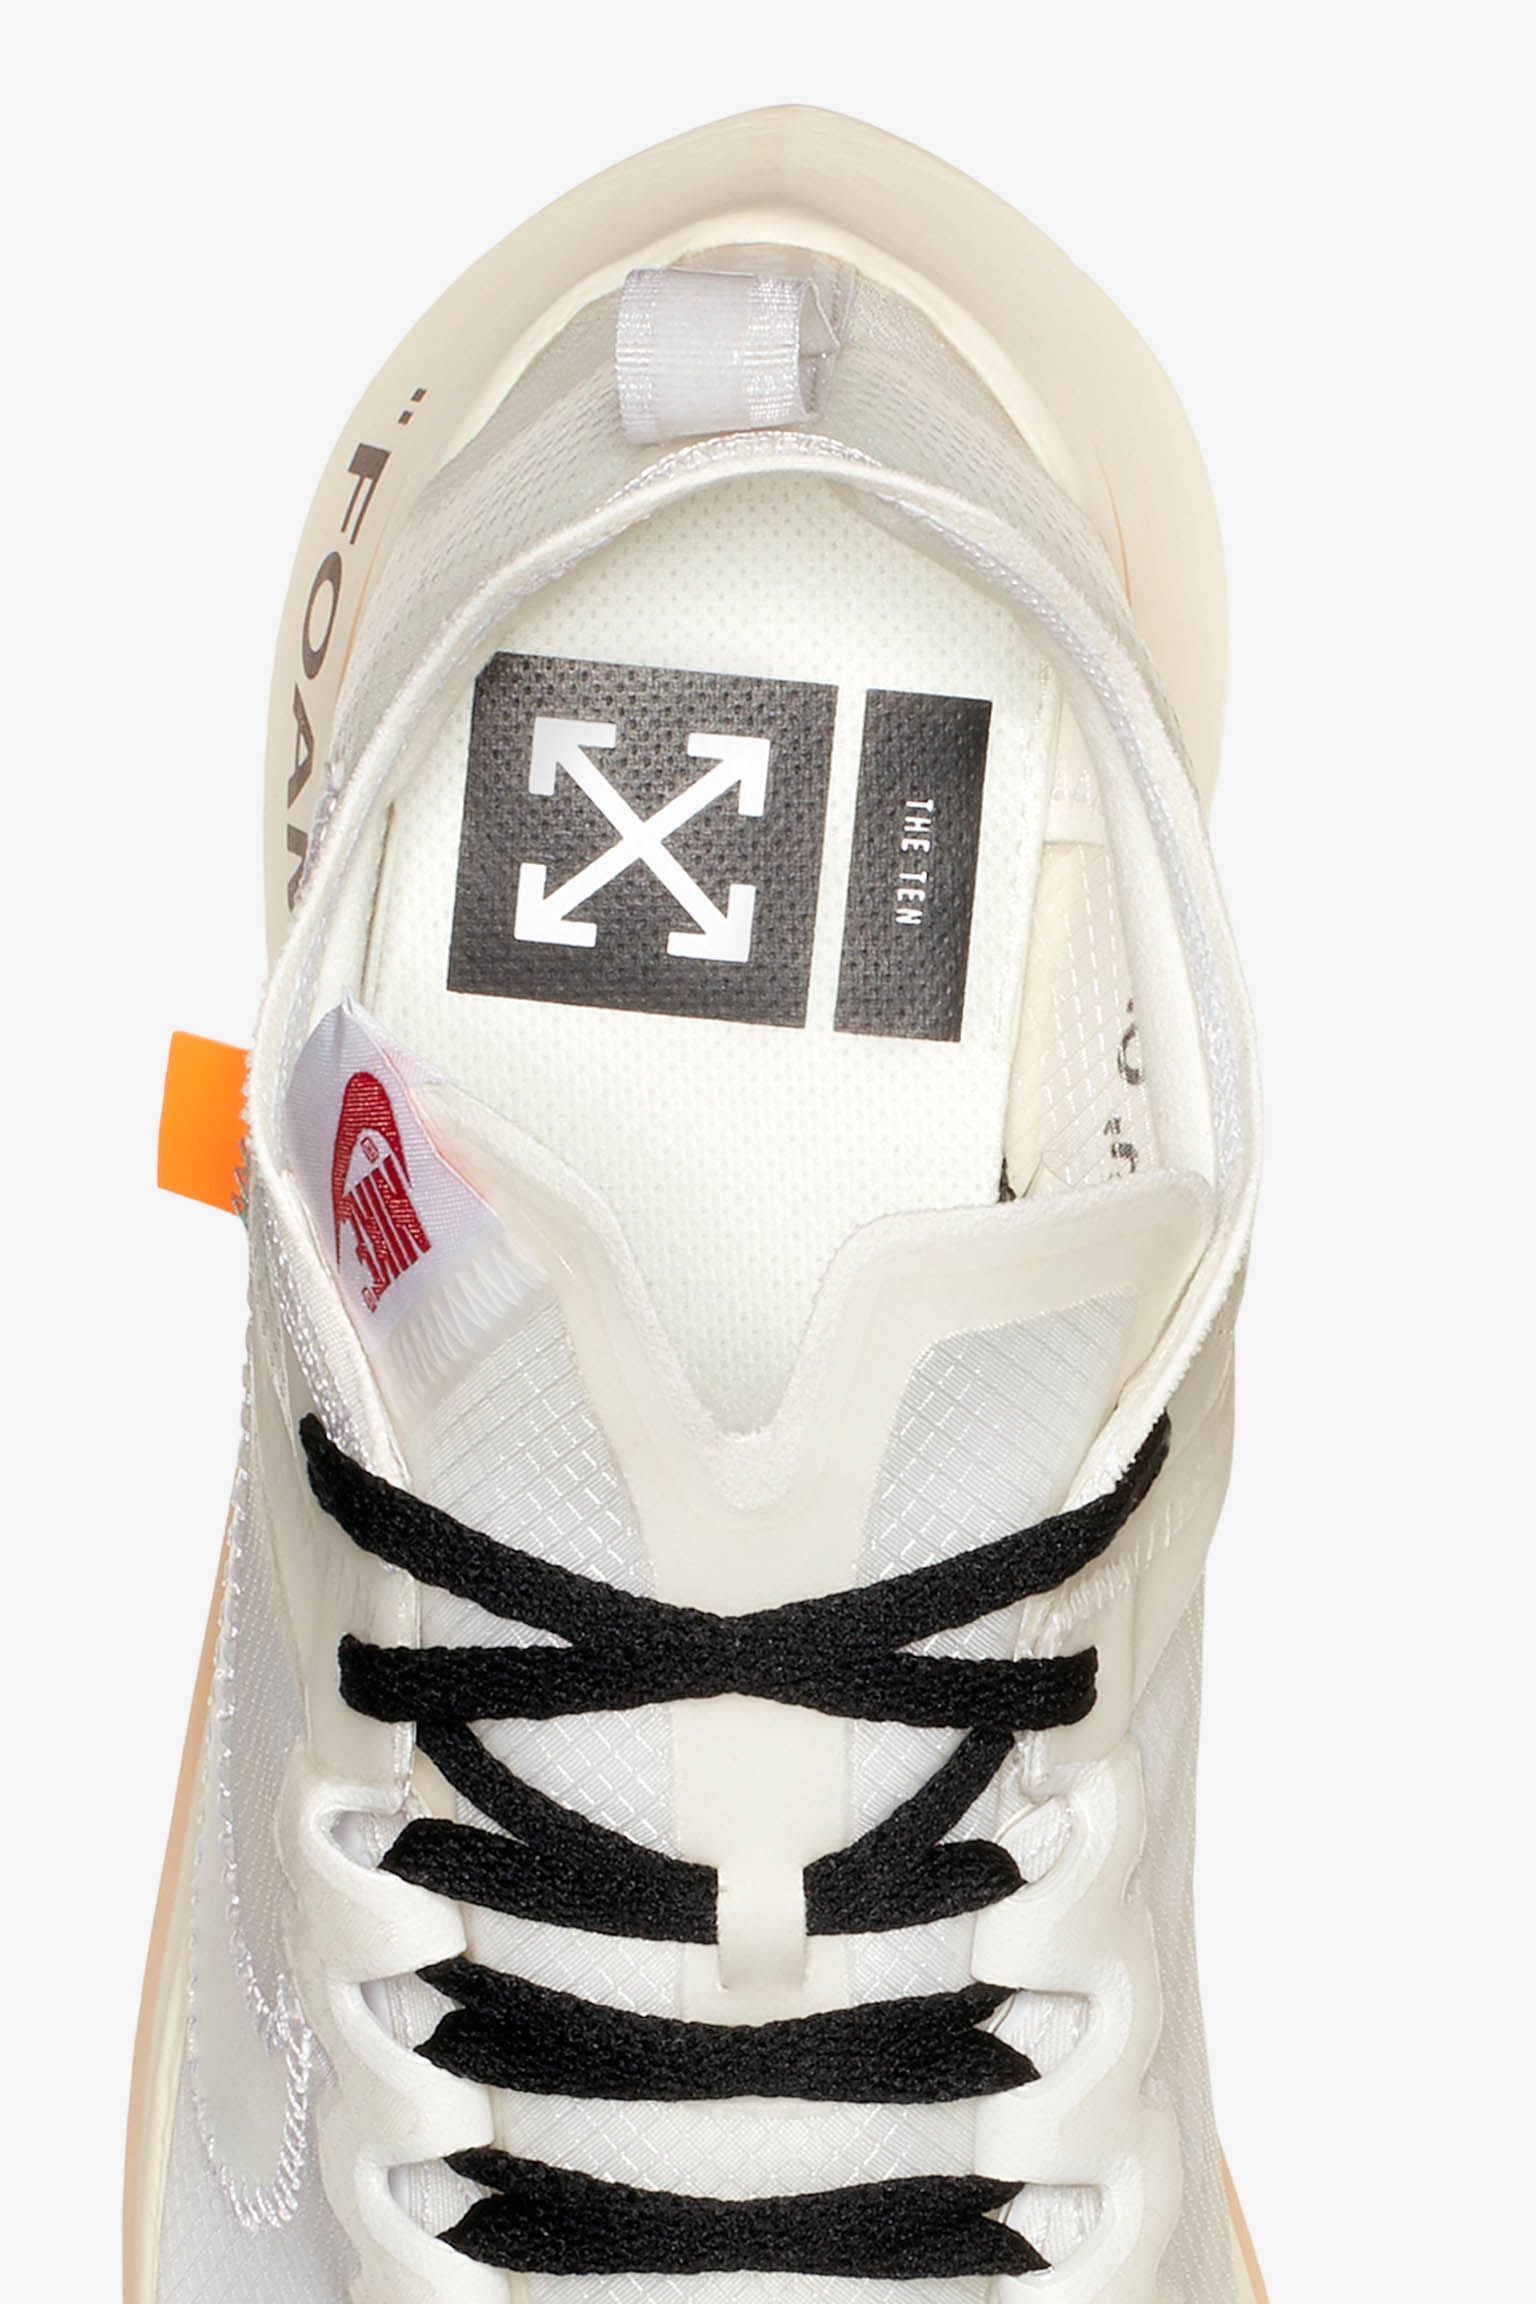 OFF-WHITE ×NIKE ZOOM FLY THE TEN 28.5新品